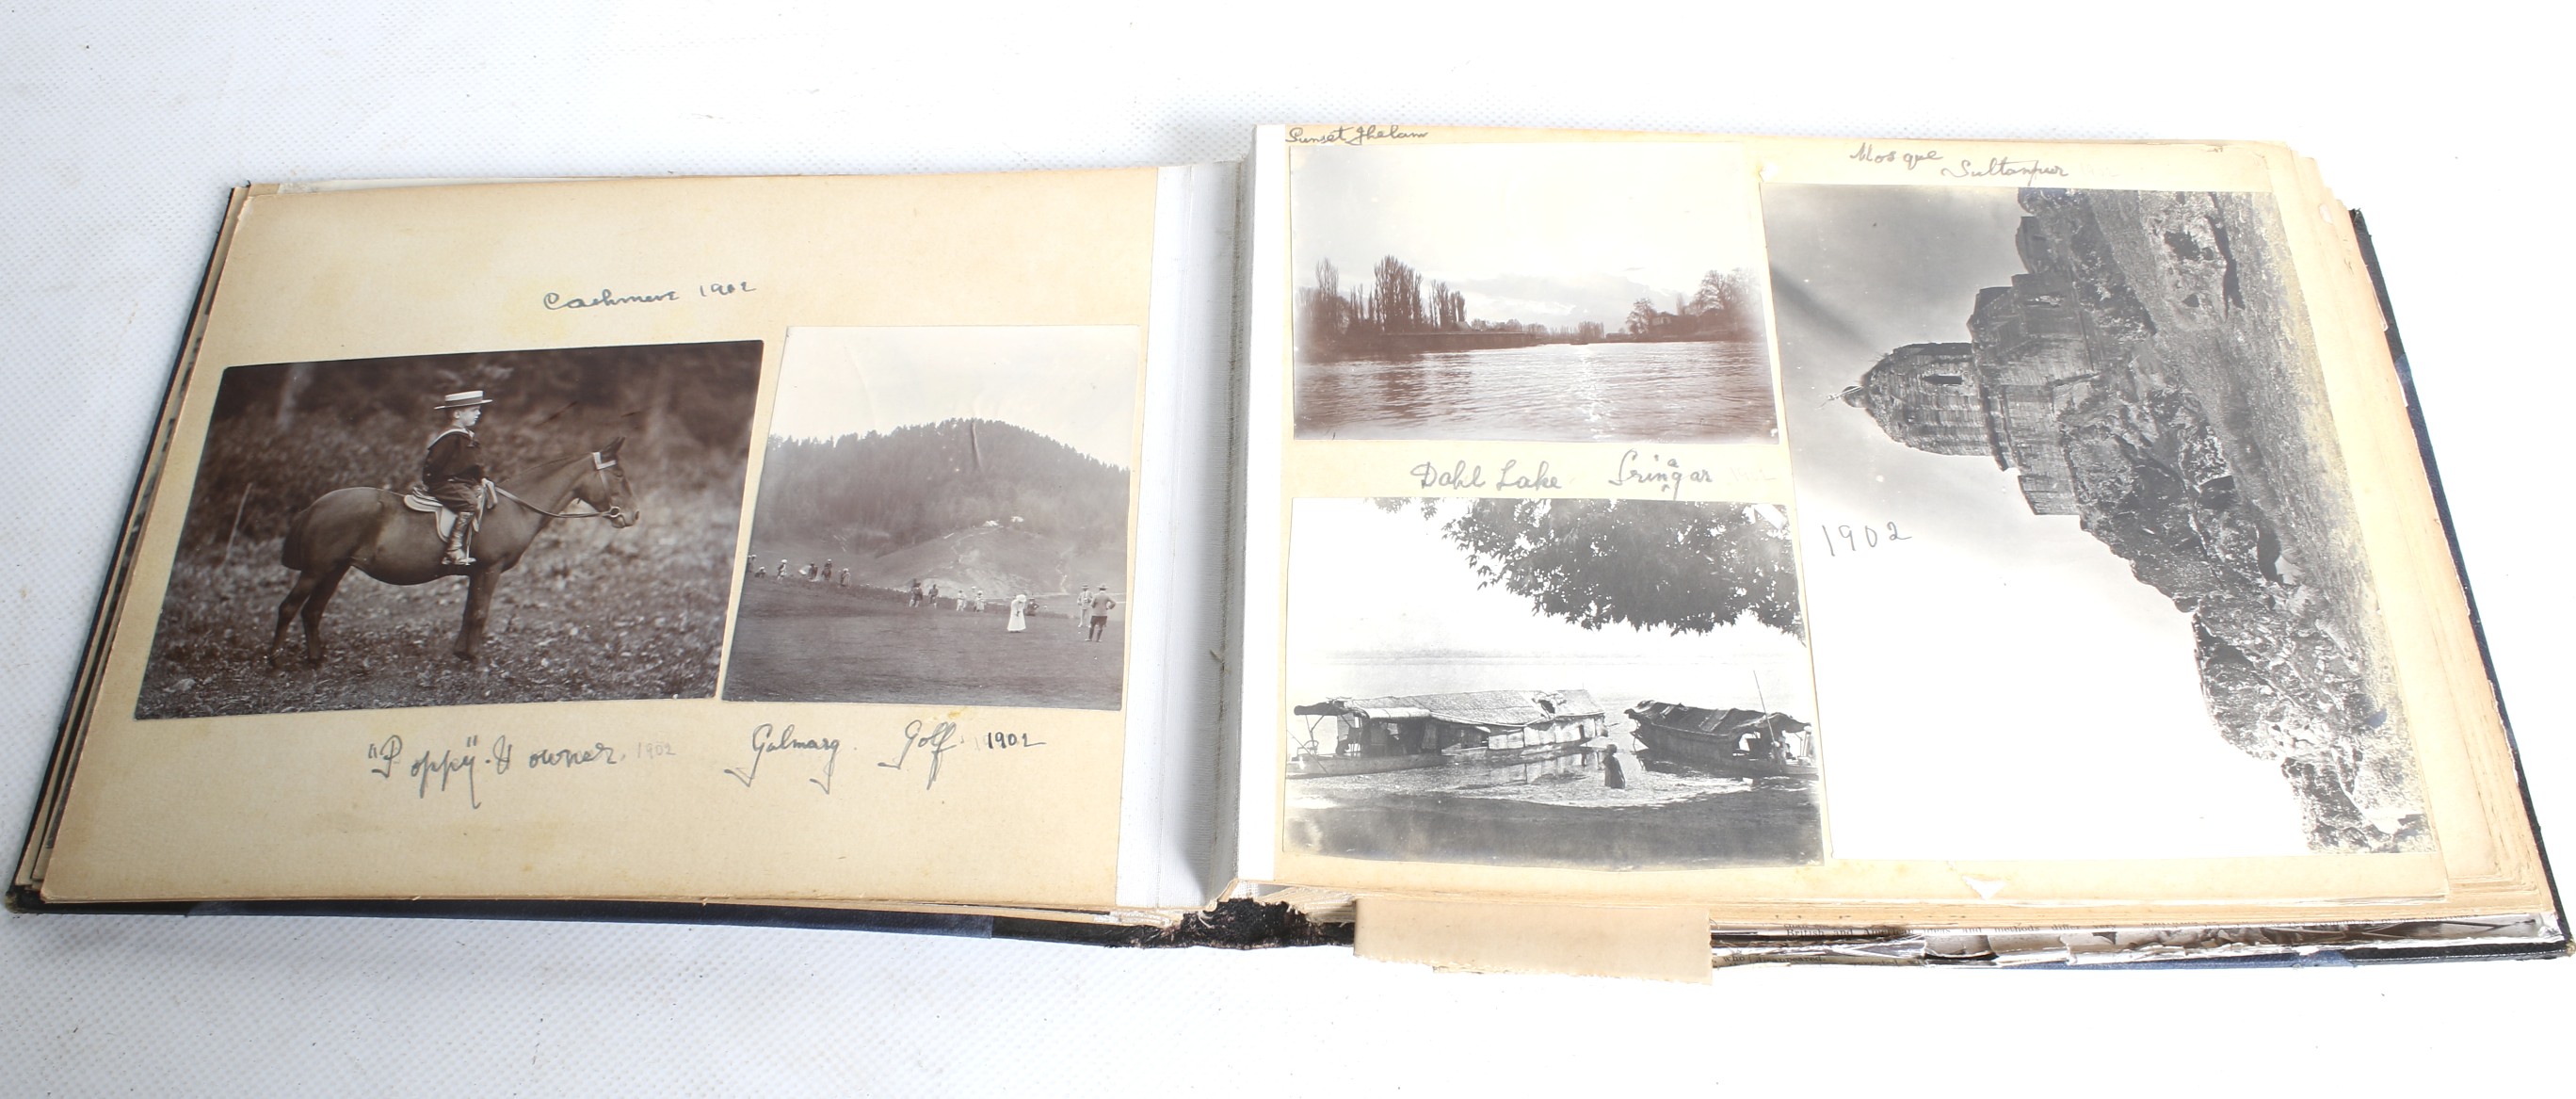 A circa 1900 album of photographs and ephemera, an autograph book and a certificate of thanks. - Image 3 of 6